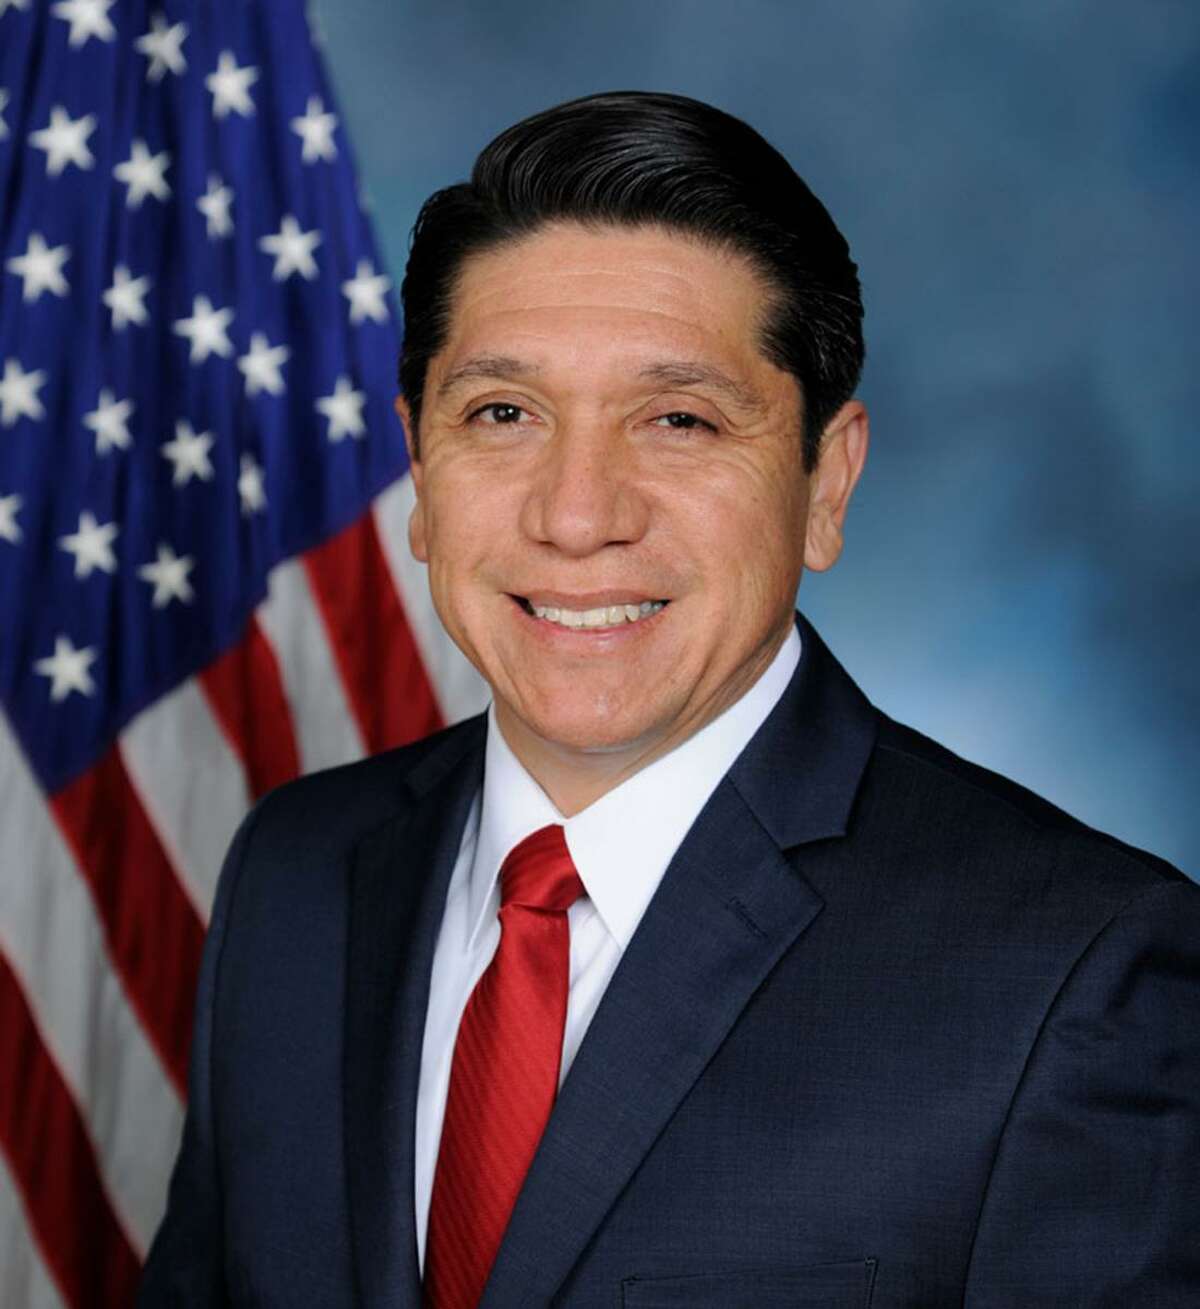 Raul Reyes, candidate for congressional district 23.